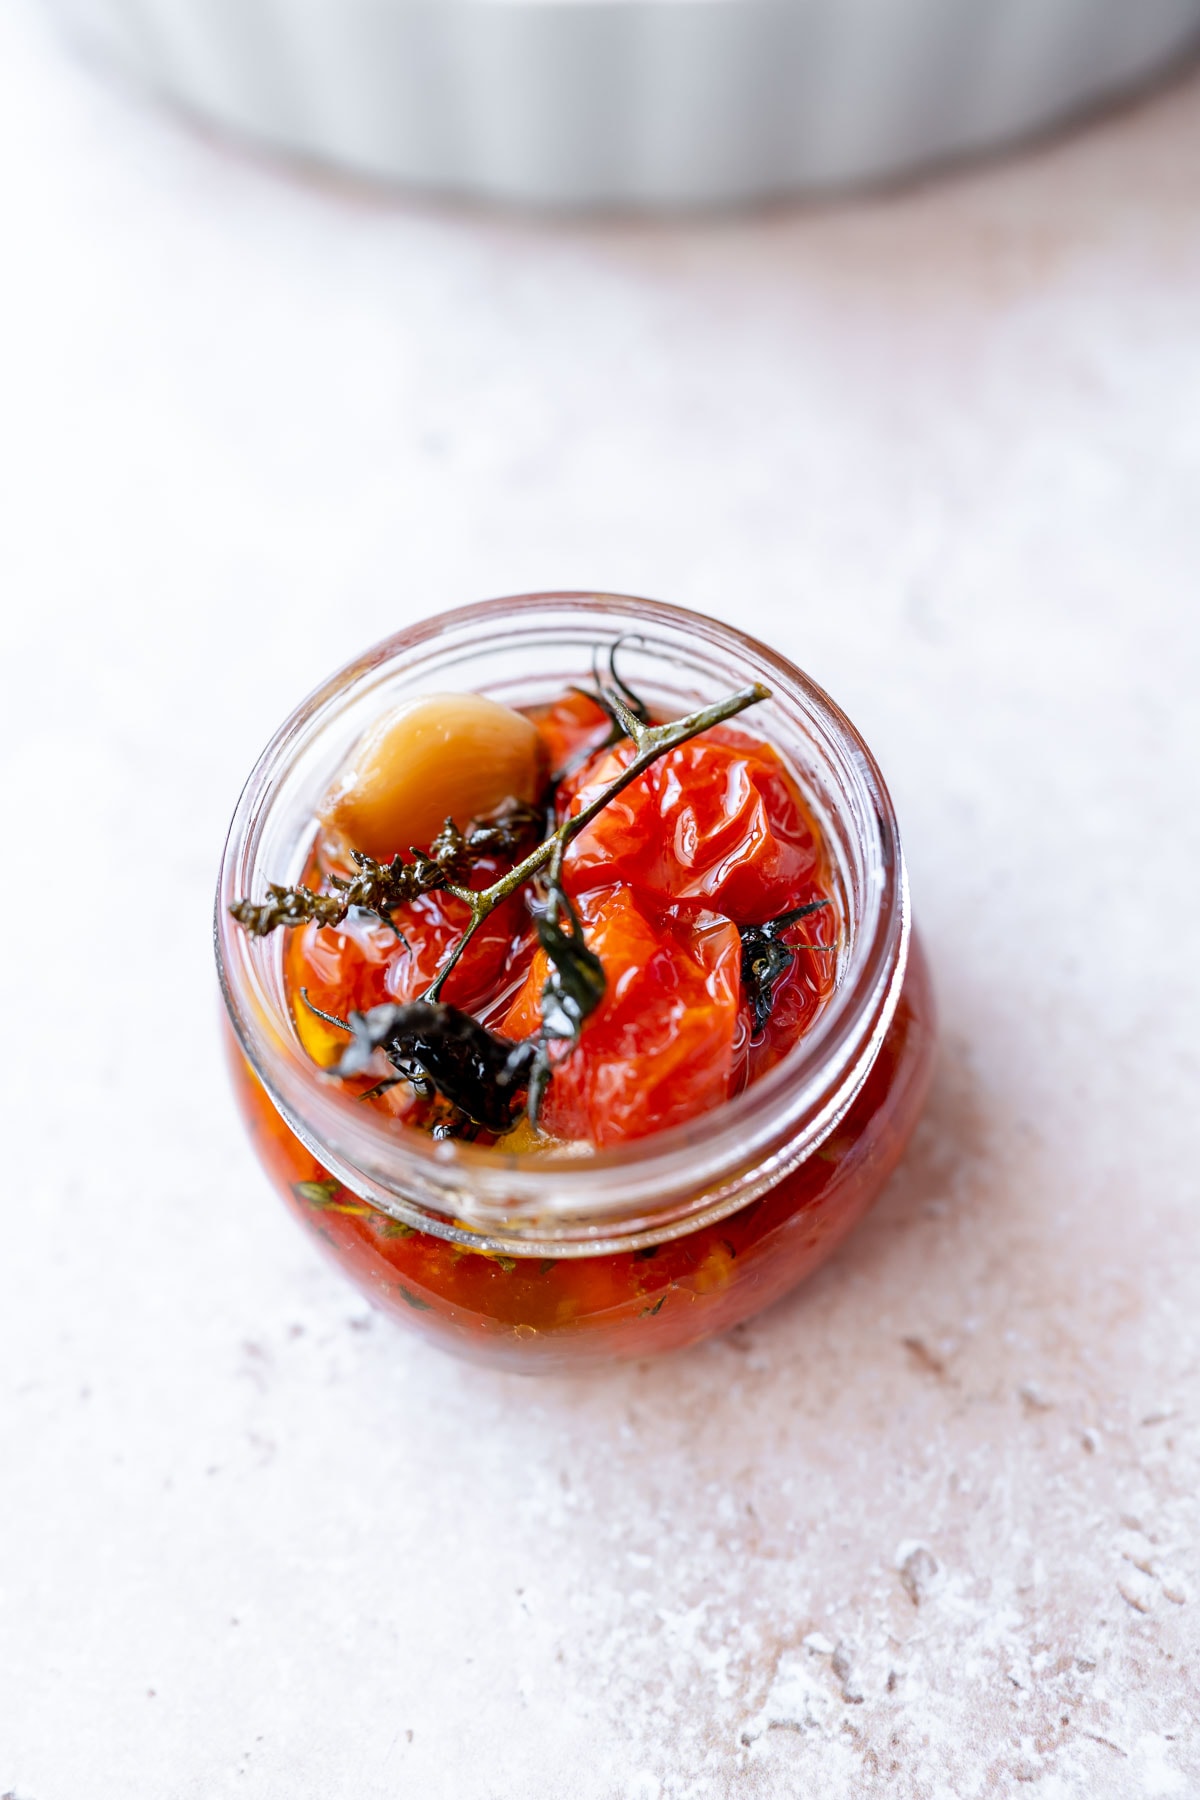 An open clear jar filled with soft red cherry tomatoes on the vine.